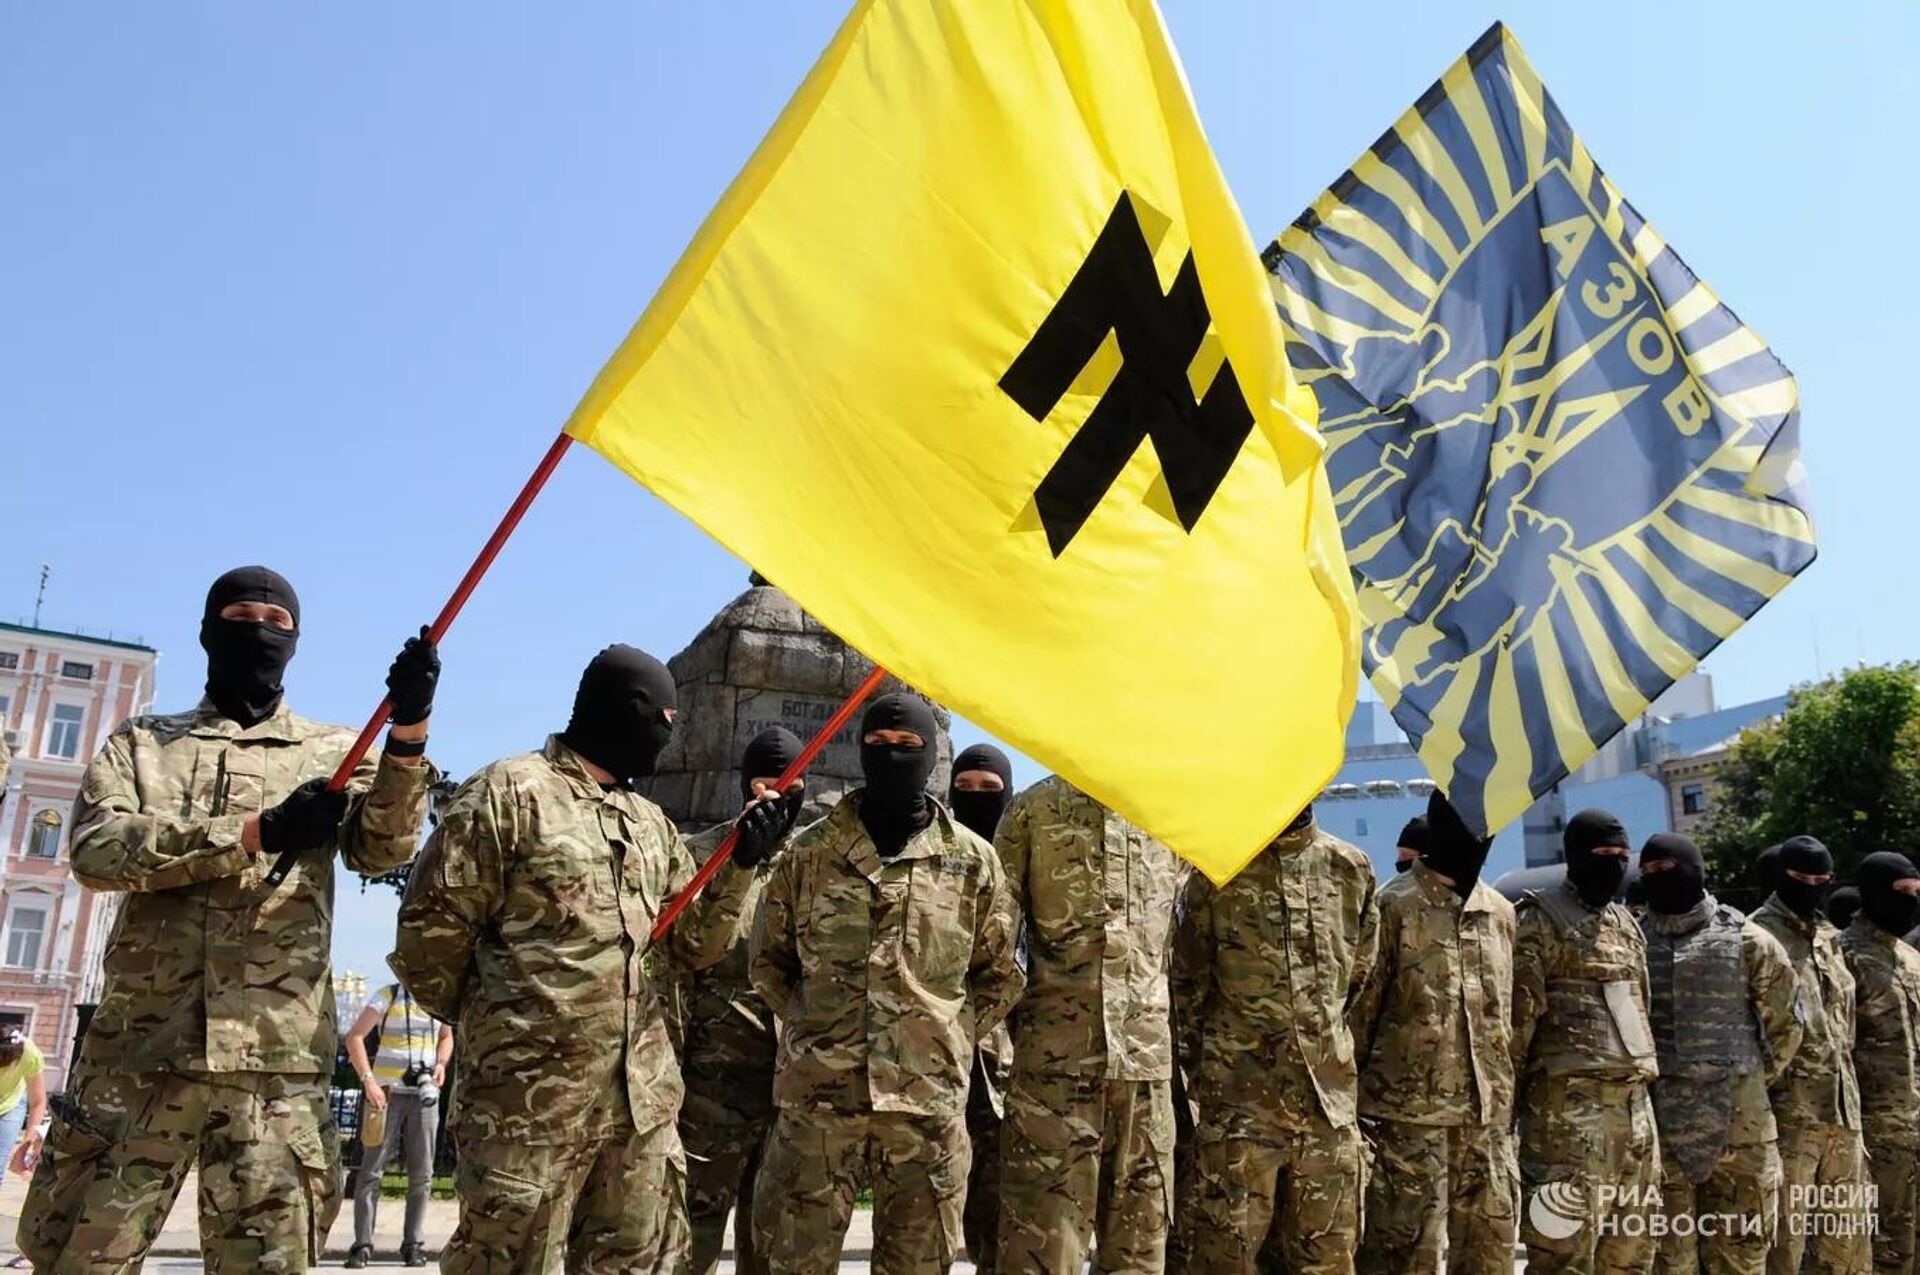 Fighters of the neo-Nazi Azov Battalion take the oath of allegiance to Ukraine in Sophia Square in Kiev before being sent to Donbass. Members of the Nazi battalion have committed hundreds of war crimes against the population of Donbass over eight years. The Azov flag has an inverted image of the runic symbol “Wolfsangel”, which was used by the Nazis. - Sputnik International, 1920, 07.06.2022